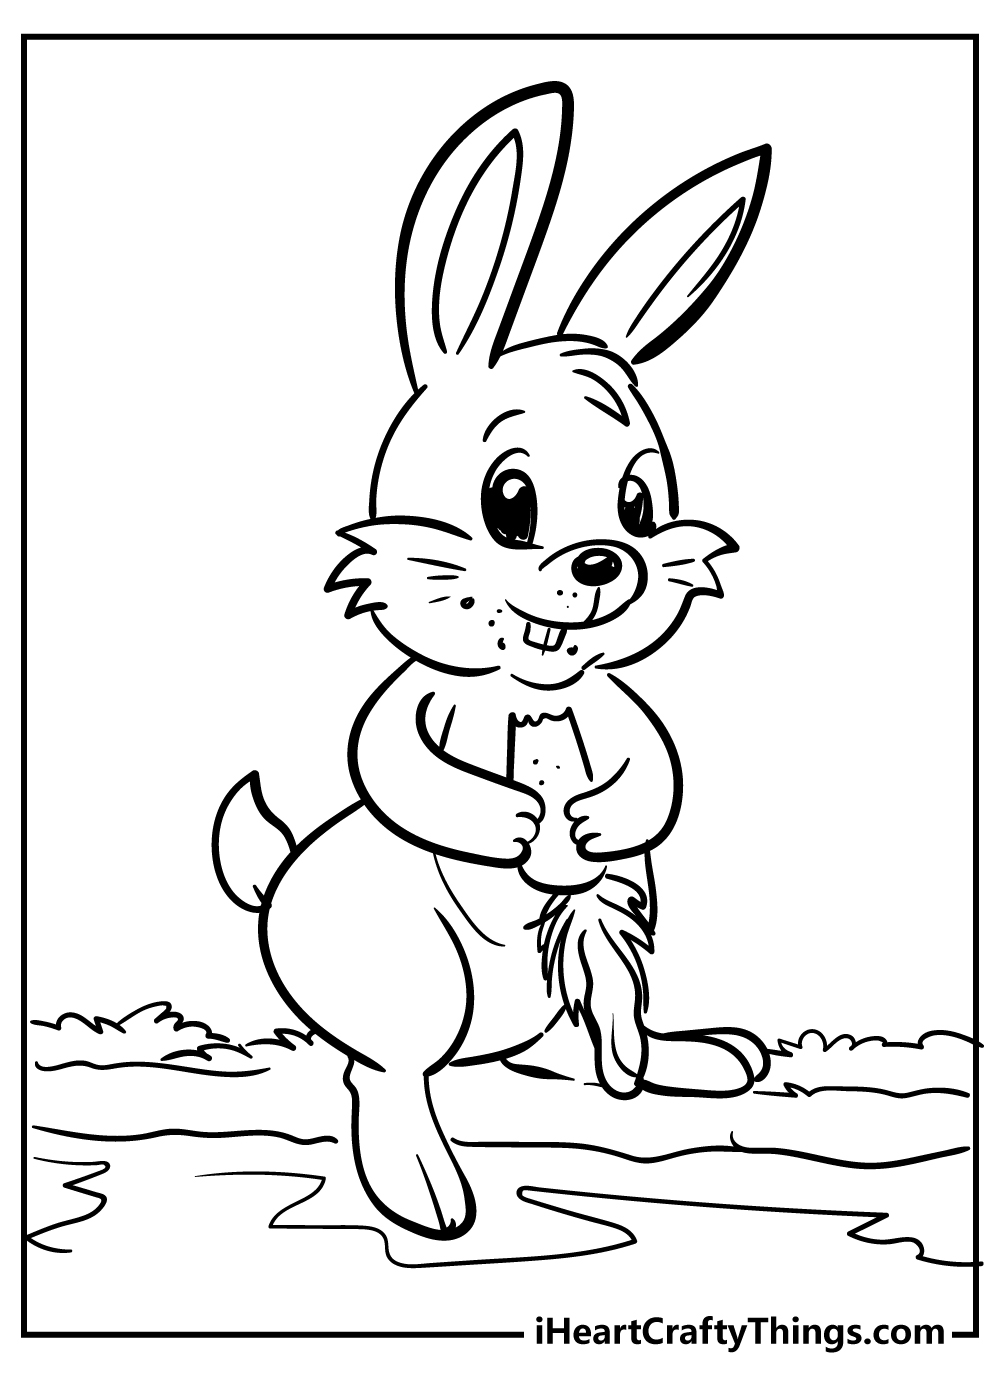 Peter rabbit coloring pages free printables